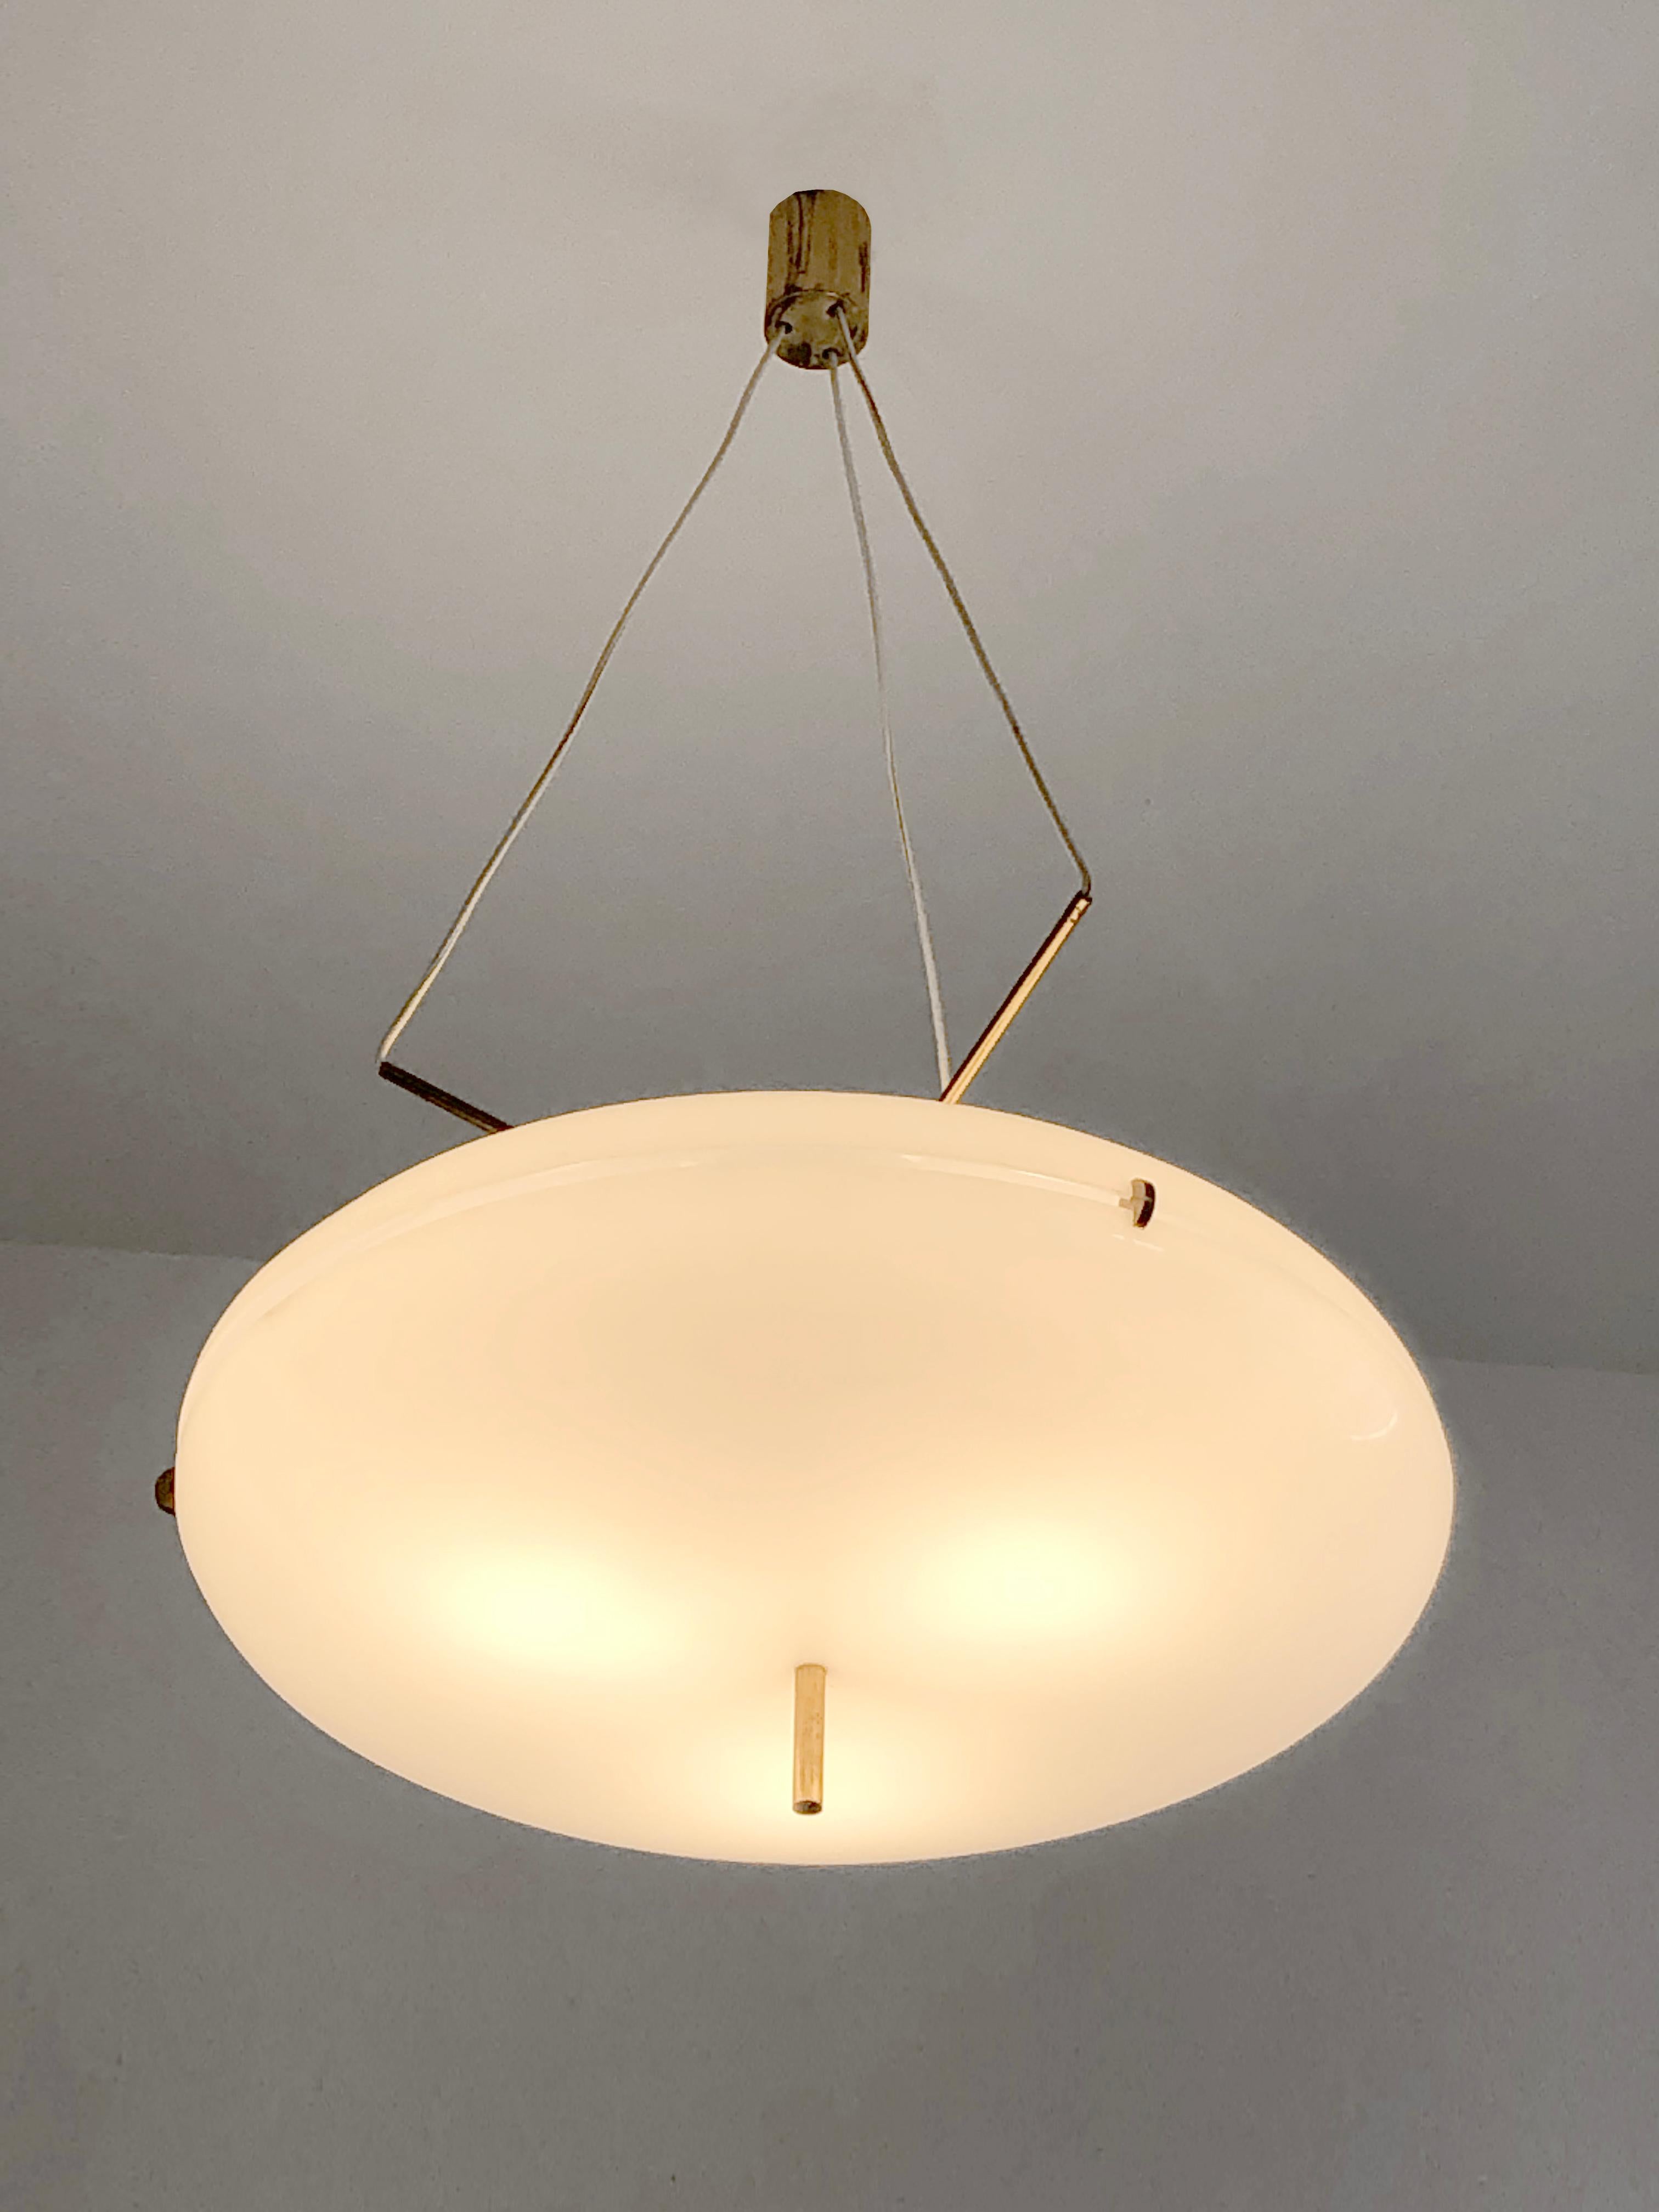 Mid-20th Century A MID-CENTURY-MODERN MODERNIST SPACE-AGE Ceiling Light by STILNOVO, Italy 1960  For Sale